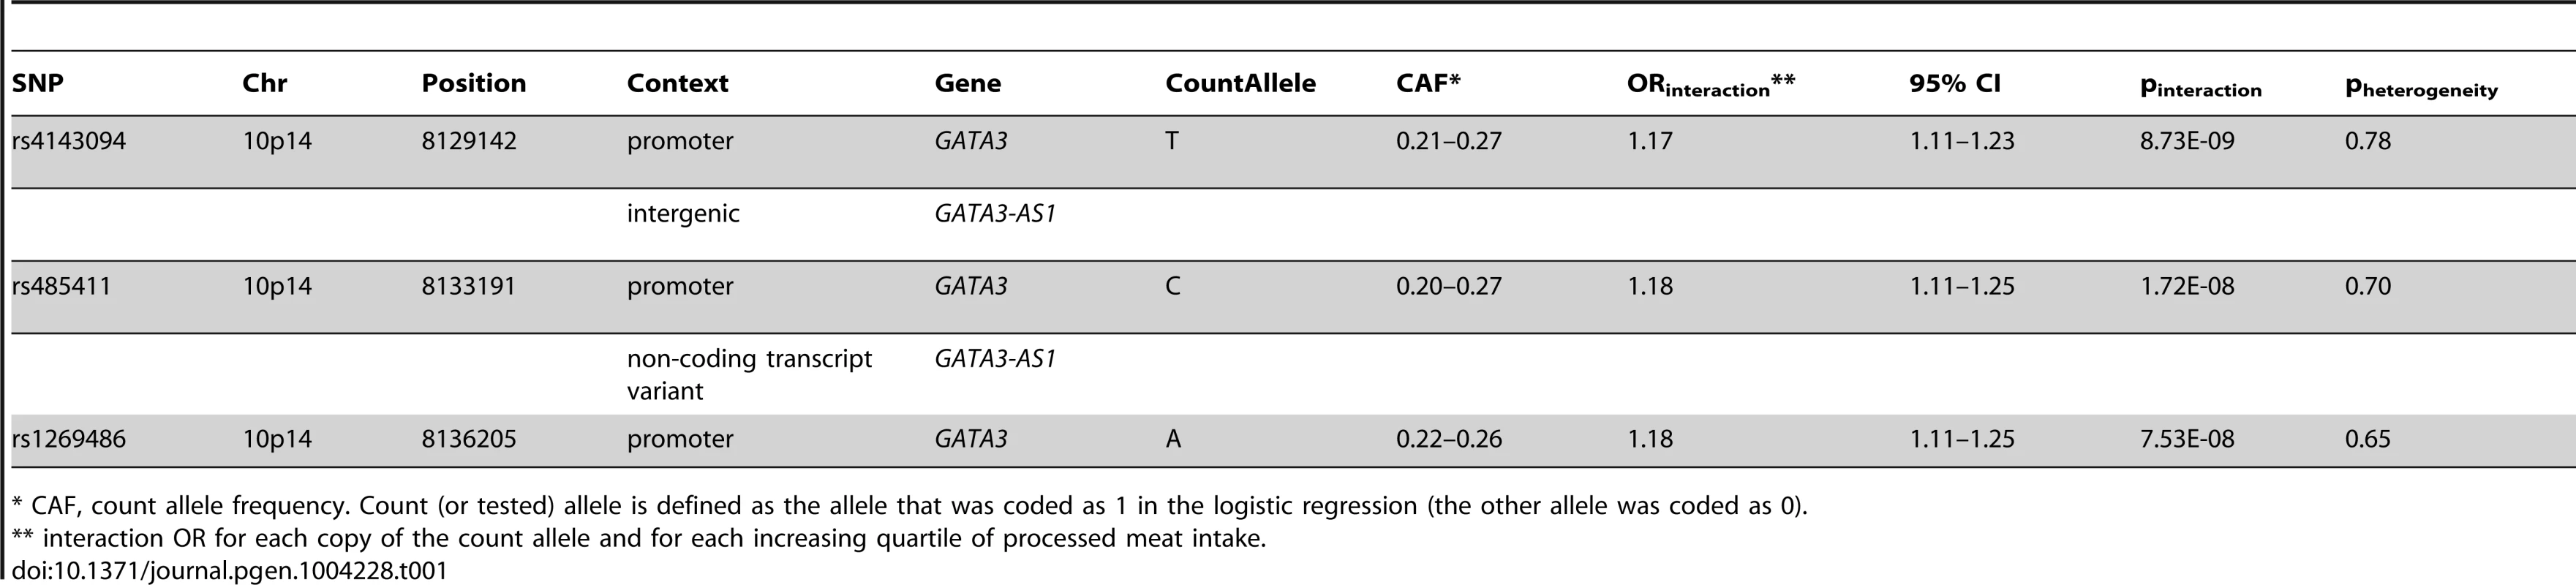 Top three SNPs according to lowest p-value for interactions with processed meat for risk of colorectal cancer using conventional case-control logistic regression approach.